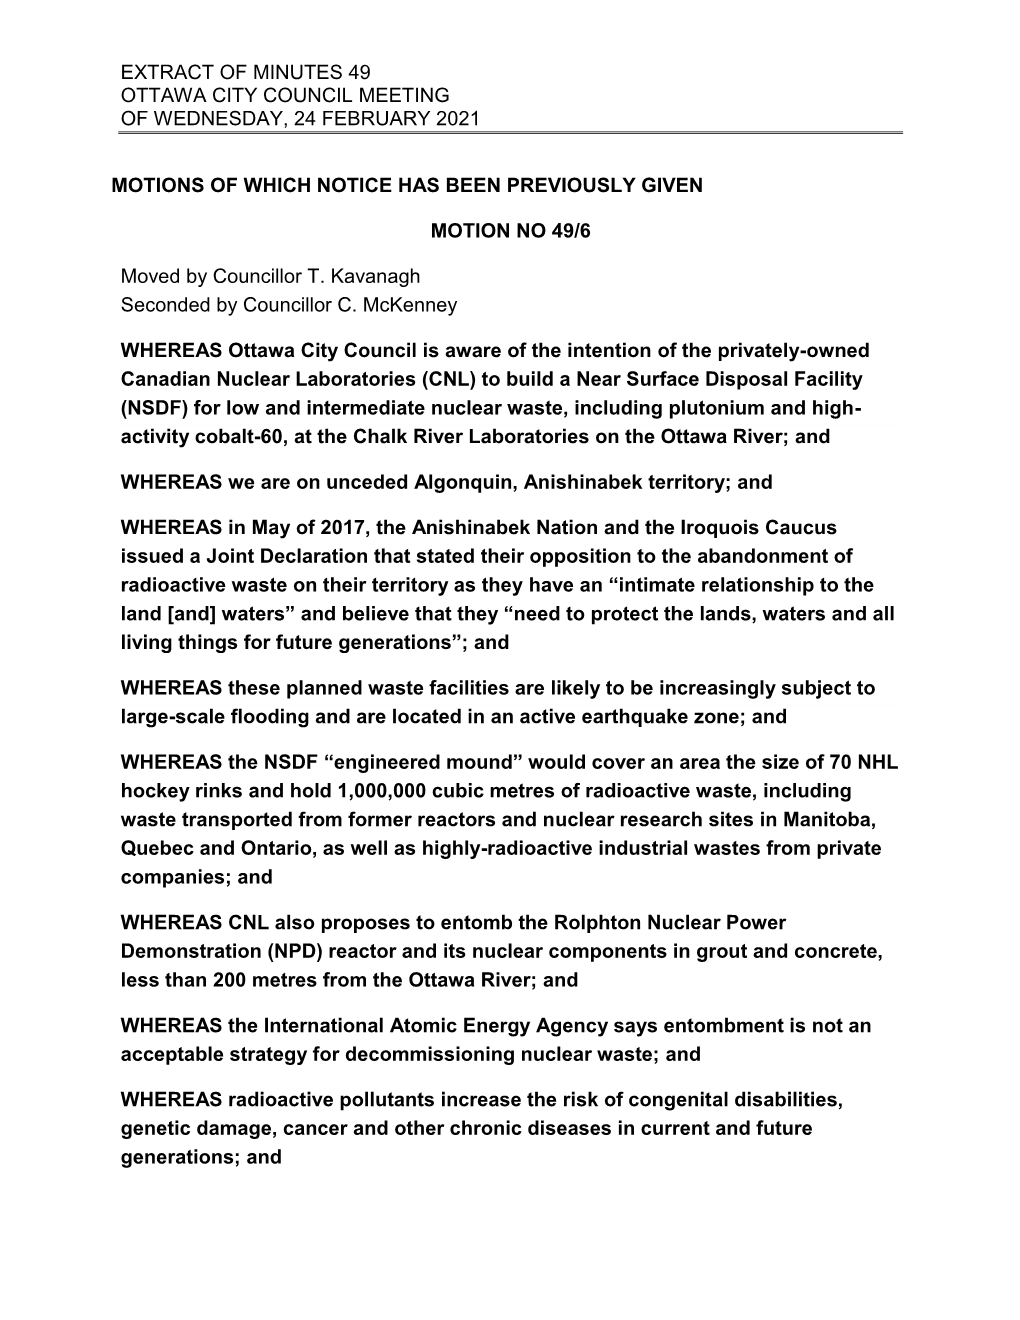 Extract of Minutes 49 Ottawa City Council Meeting of Wednesday, 24 February 2021 Motions of Which Notice Has Been Previously